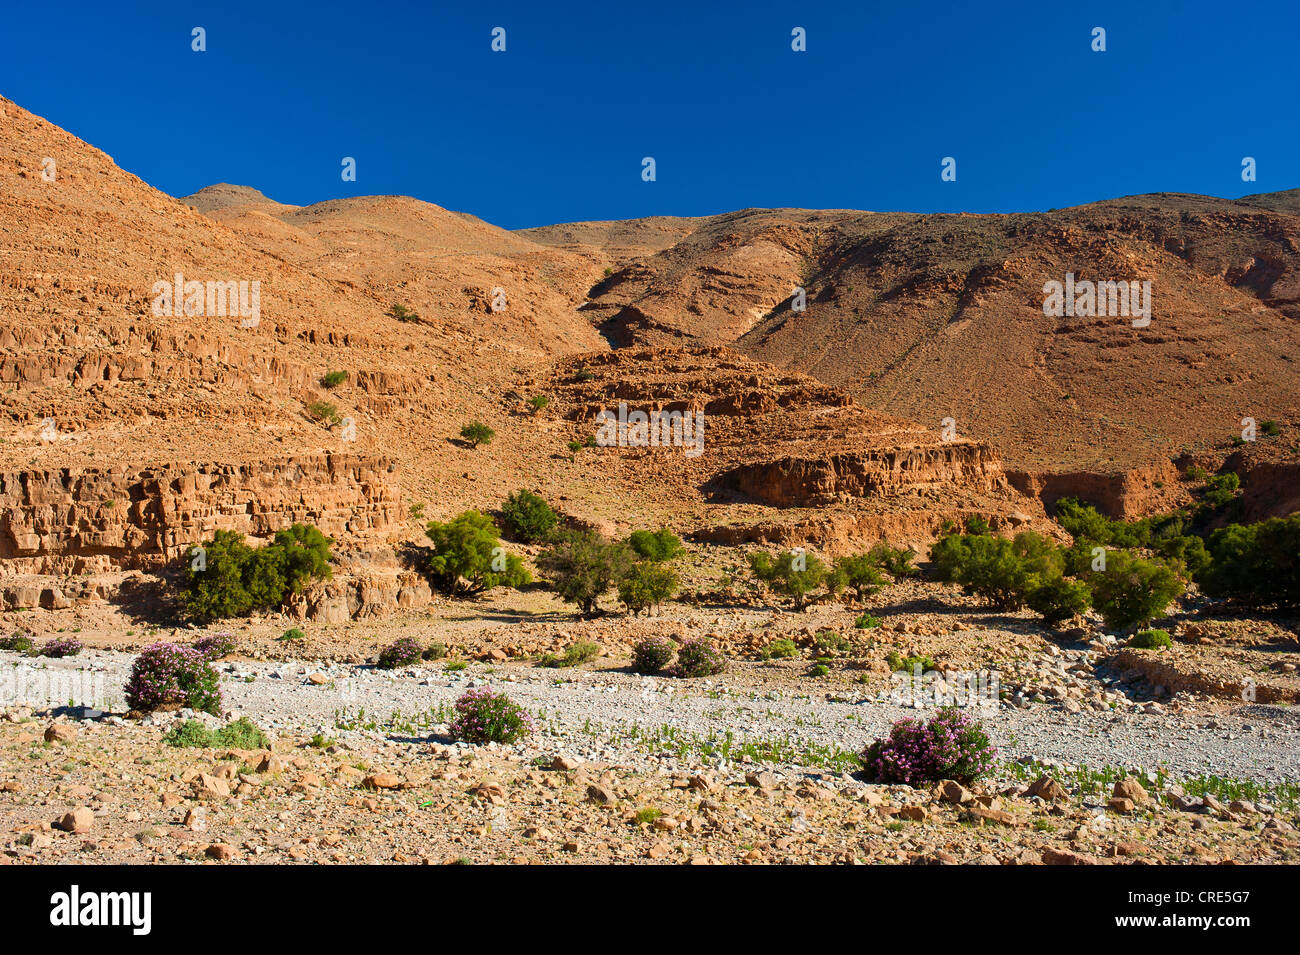 Mountain landscape in the valley of Ait Mansour with scattered trees and shrubs in a dry river bed, Anti-Atlas mountain range Stock Photo